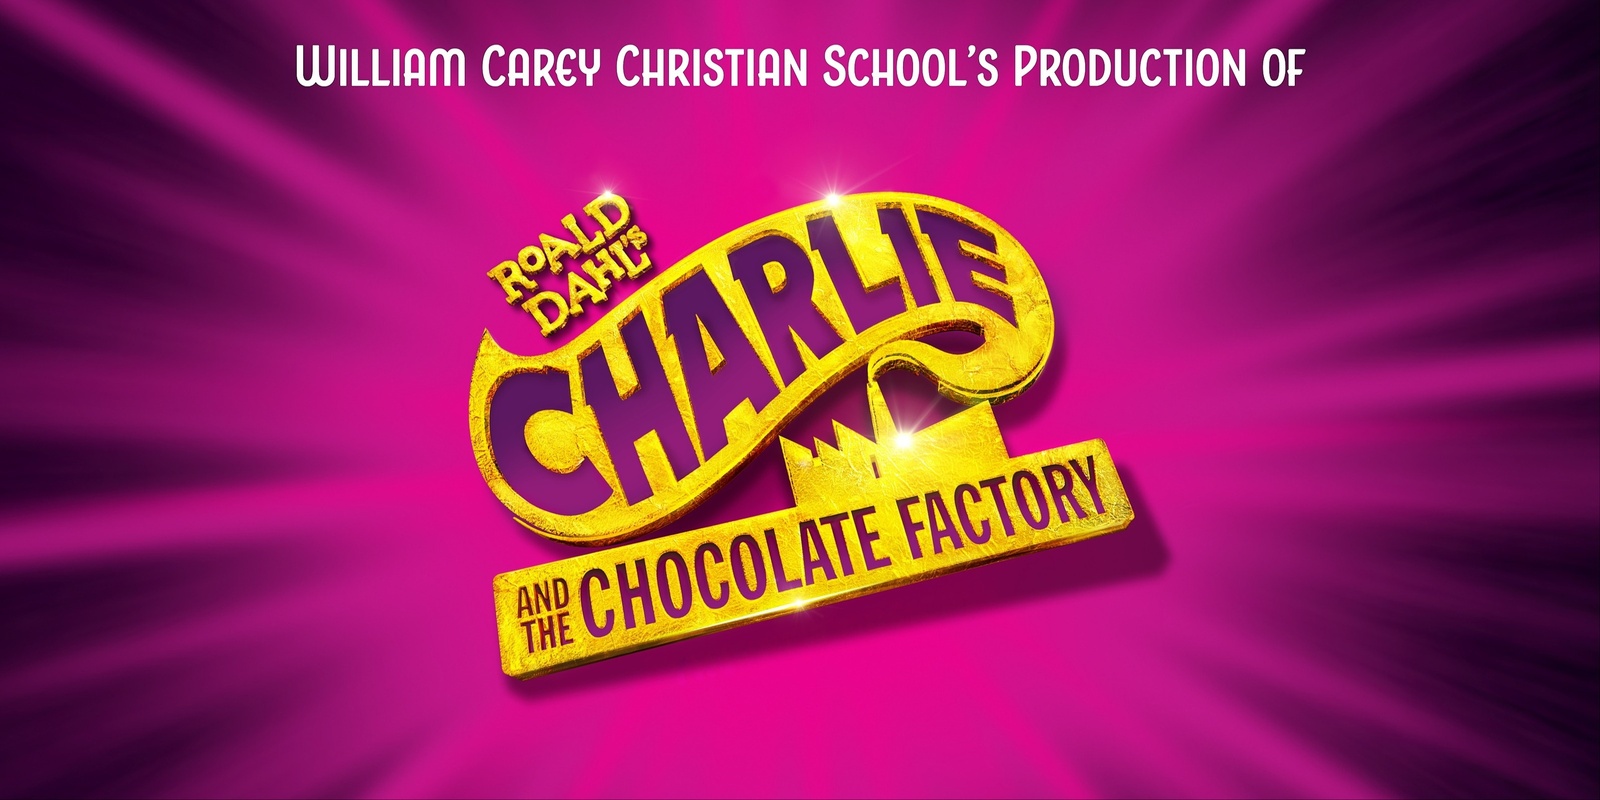 Banner image for Charlie and the Chocolate Factory at WCCS